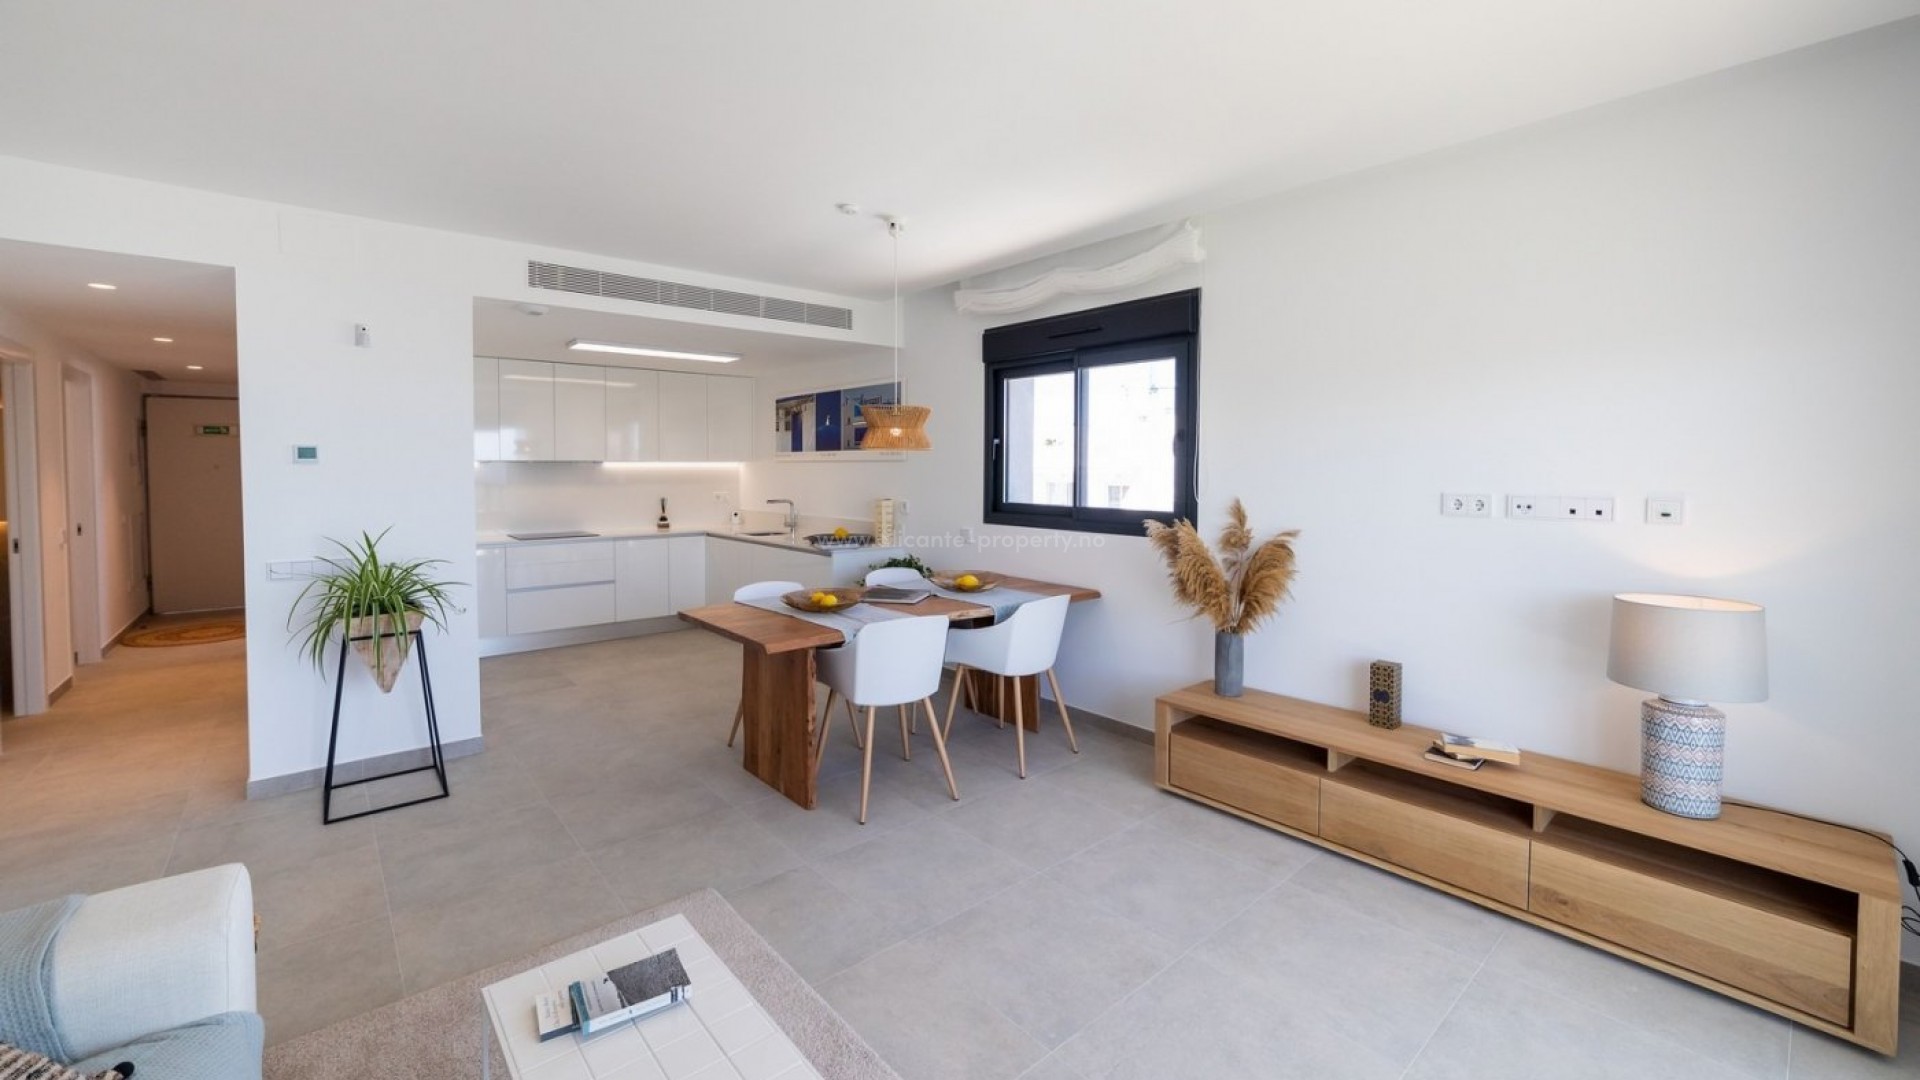 Apartments/flats in Gran Alacant/Santa Pola with 2/3 bedrooms and 2 bathrooms, sea view and short distance to Carabassi beach. Communal pools and nice gardens.